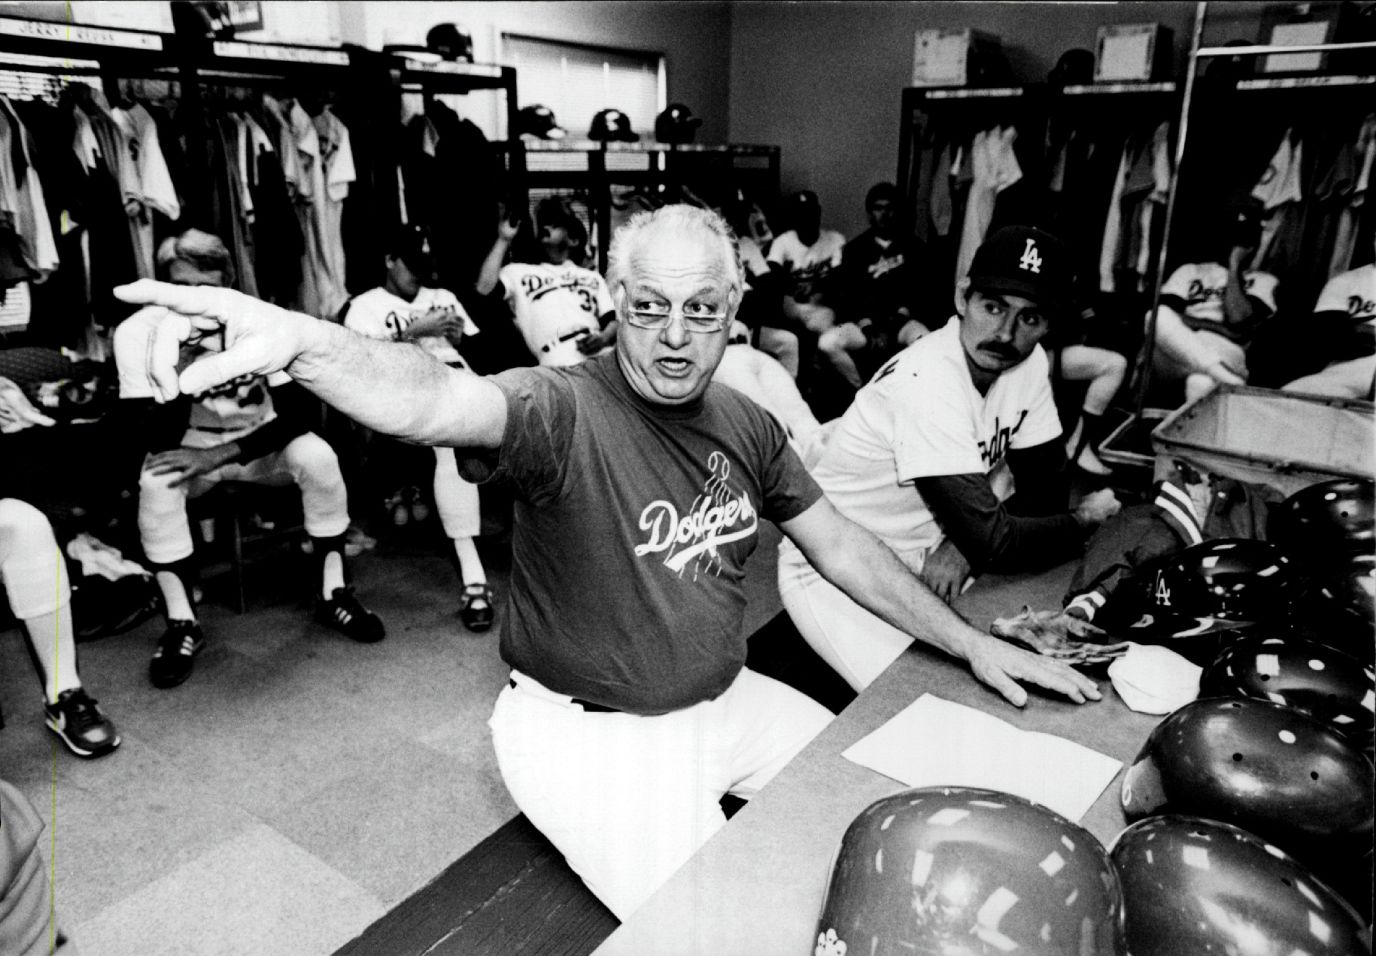 Uncle Mike's Musings: A Yankees Blog and More: Tommy Lasorda, 1927-2021